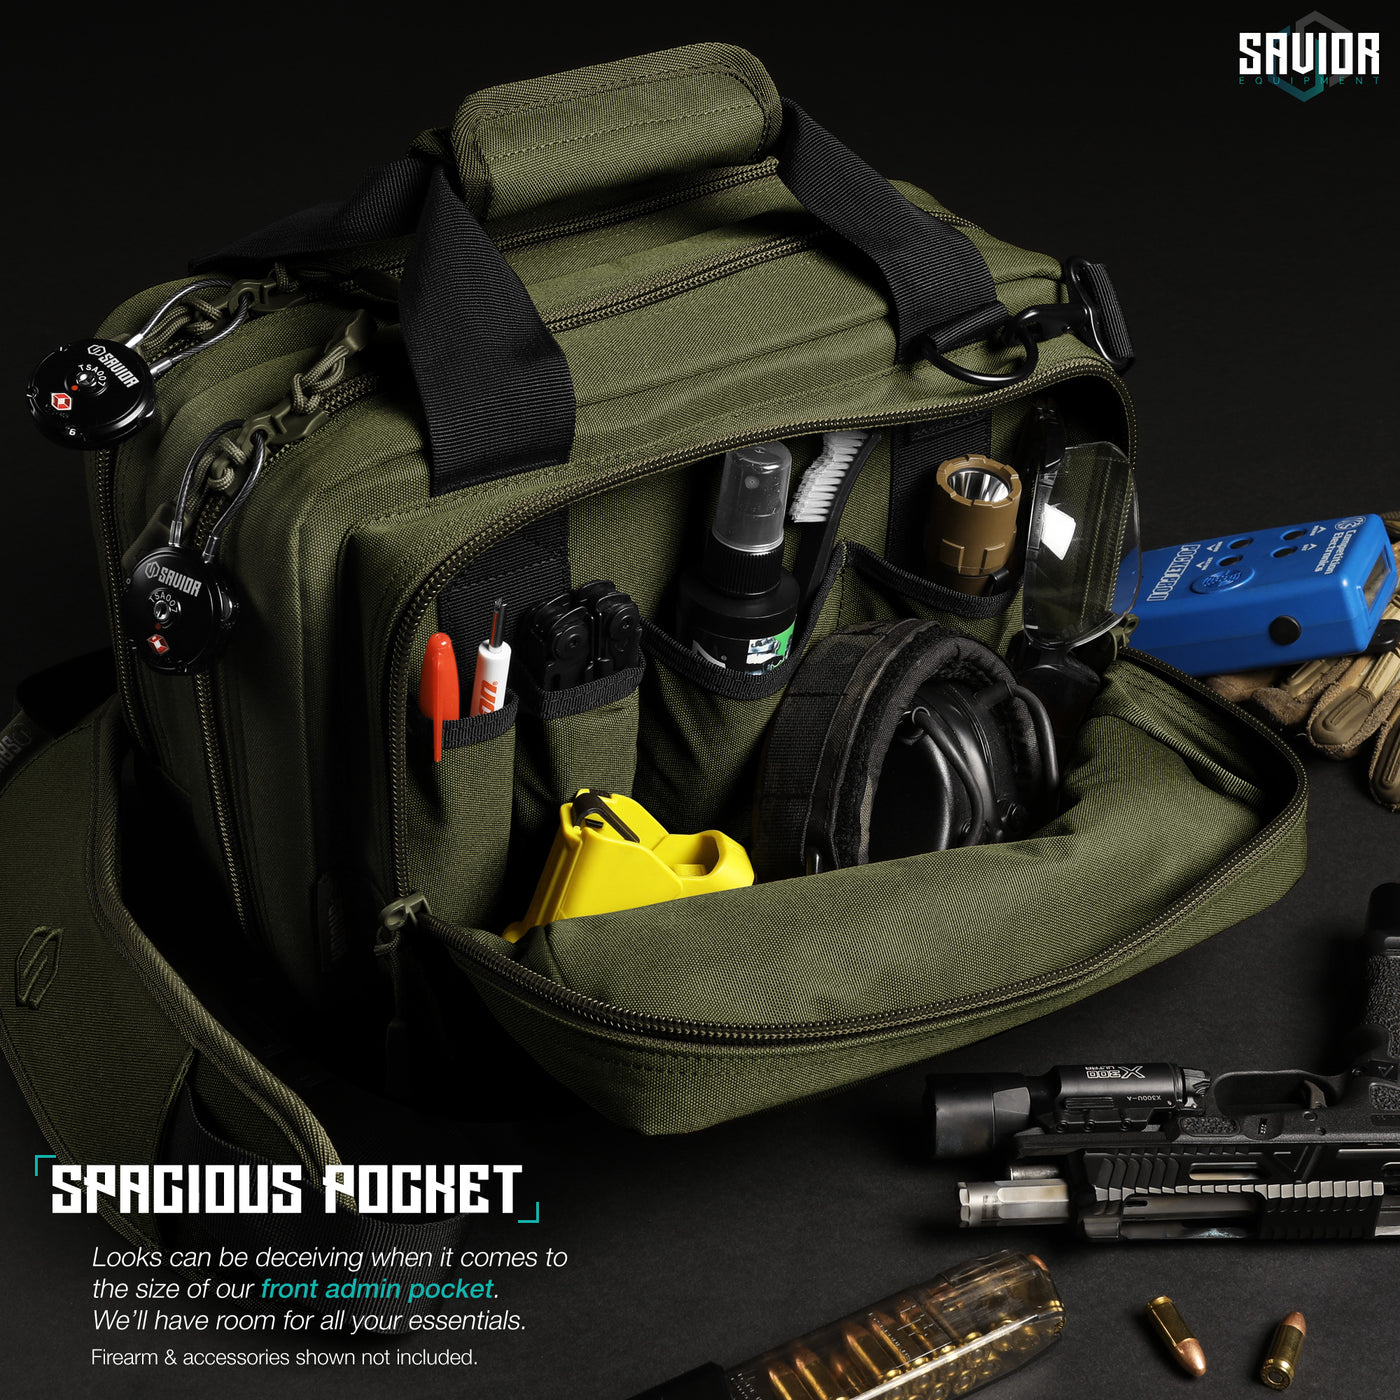 Spacious Pocket - Looks can be deceiving when it comes to the size of our front admin pocket. We’ll have room for all your essentials. Firearms & accessories shown not included.